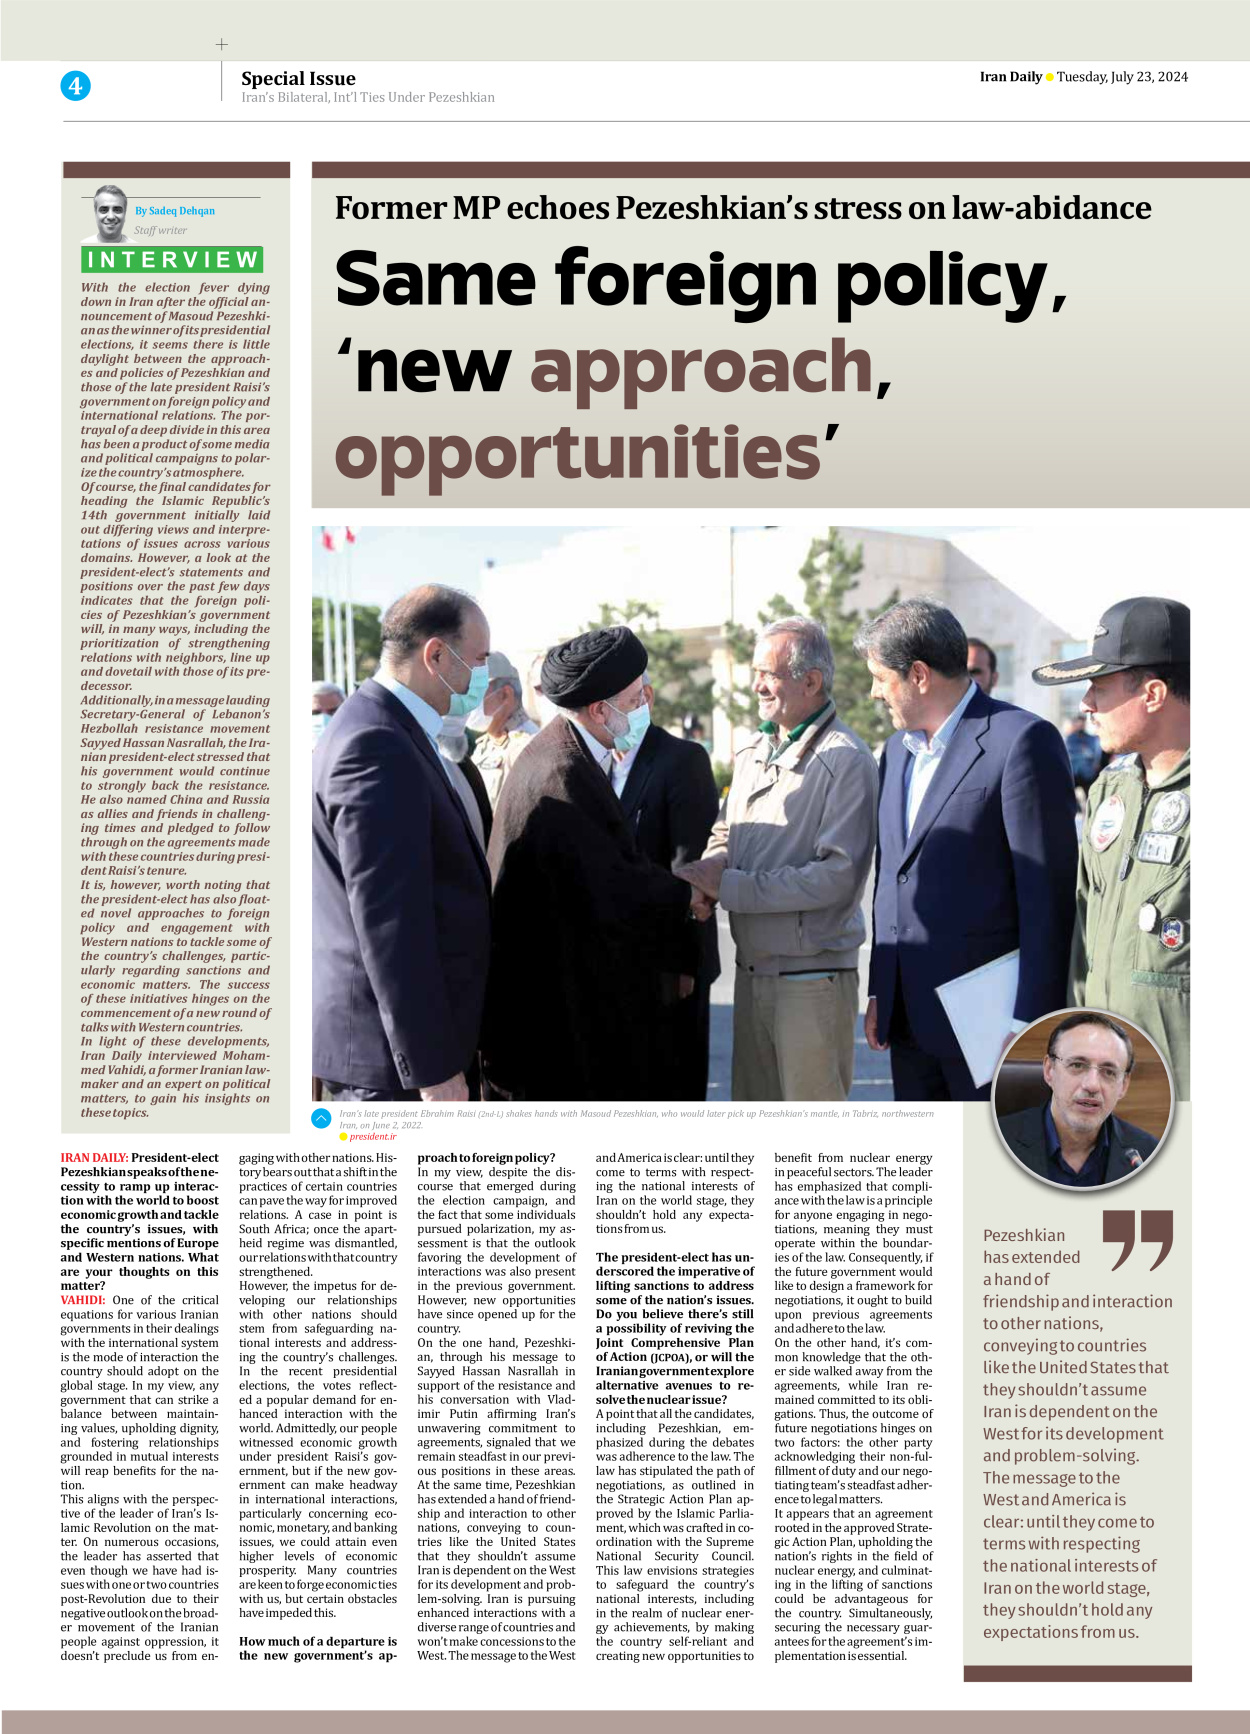 Iran Daily - Number Seven Thousand Six Hundred and Ten - 23 July 2024 - Page 4